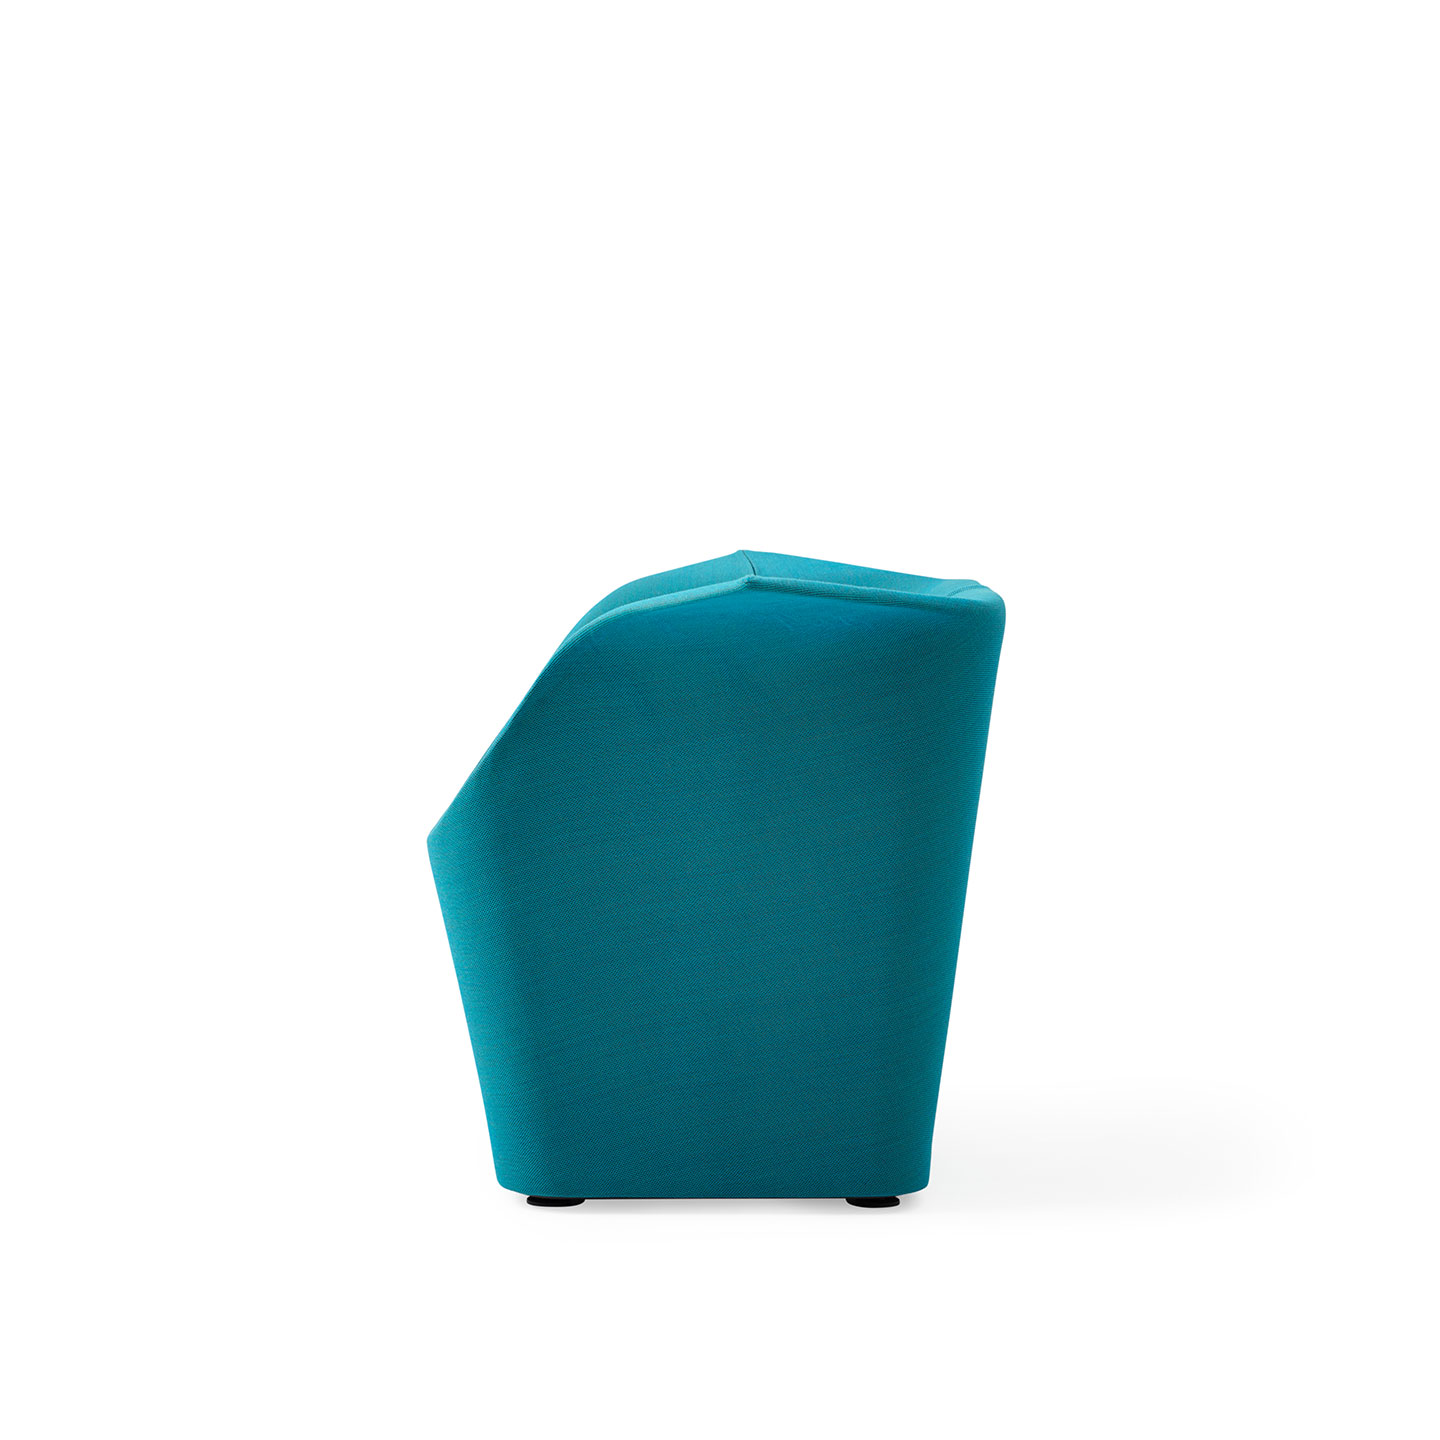 Haworth Garment lounge chair in teal color in side view